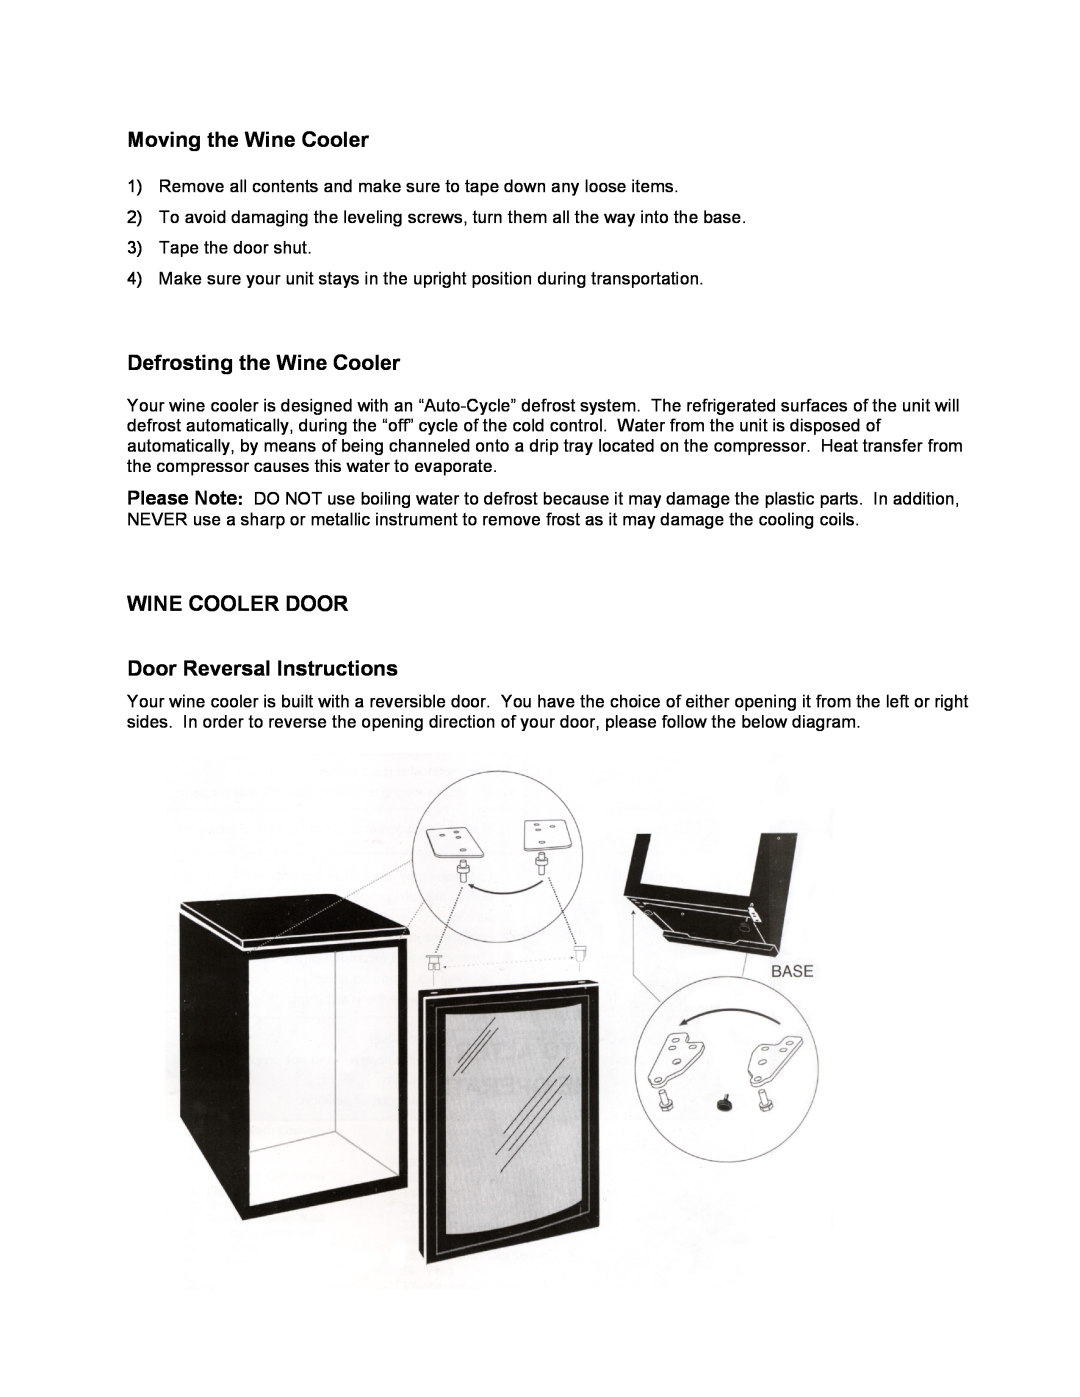 Soleus Air JC-128E Moving the Wine Cooler, Defrosting the Wine Cooler, WINE COOLER DOOR Door Reversal Instructions 